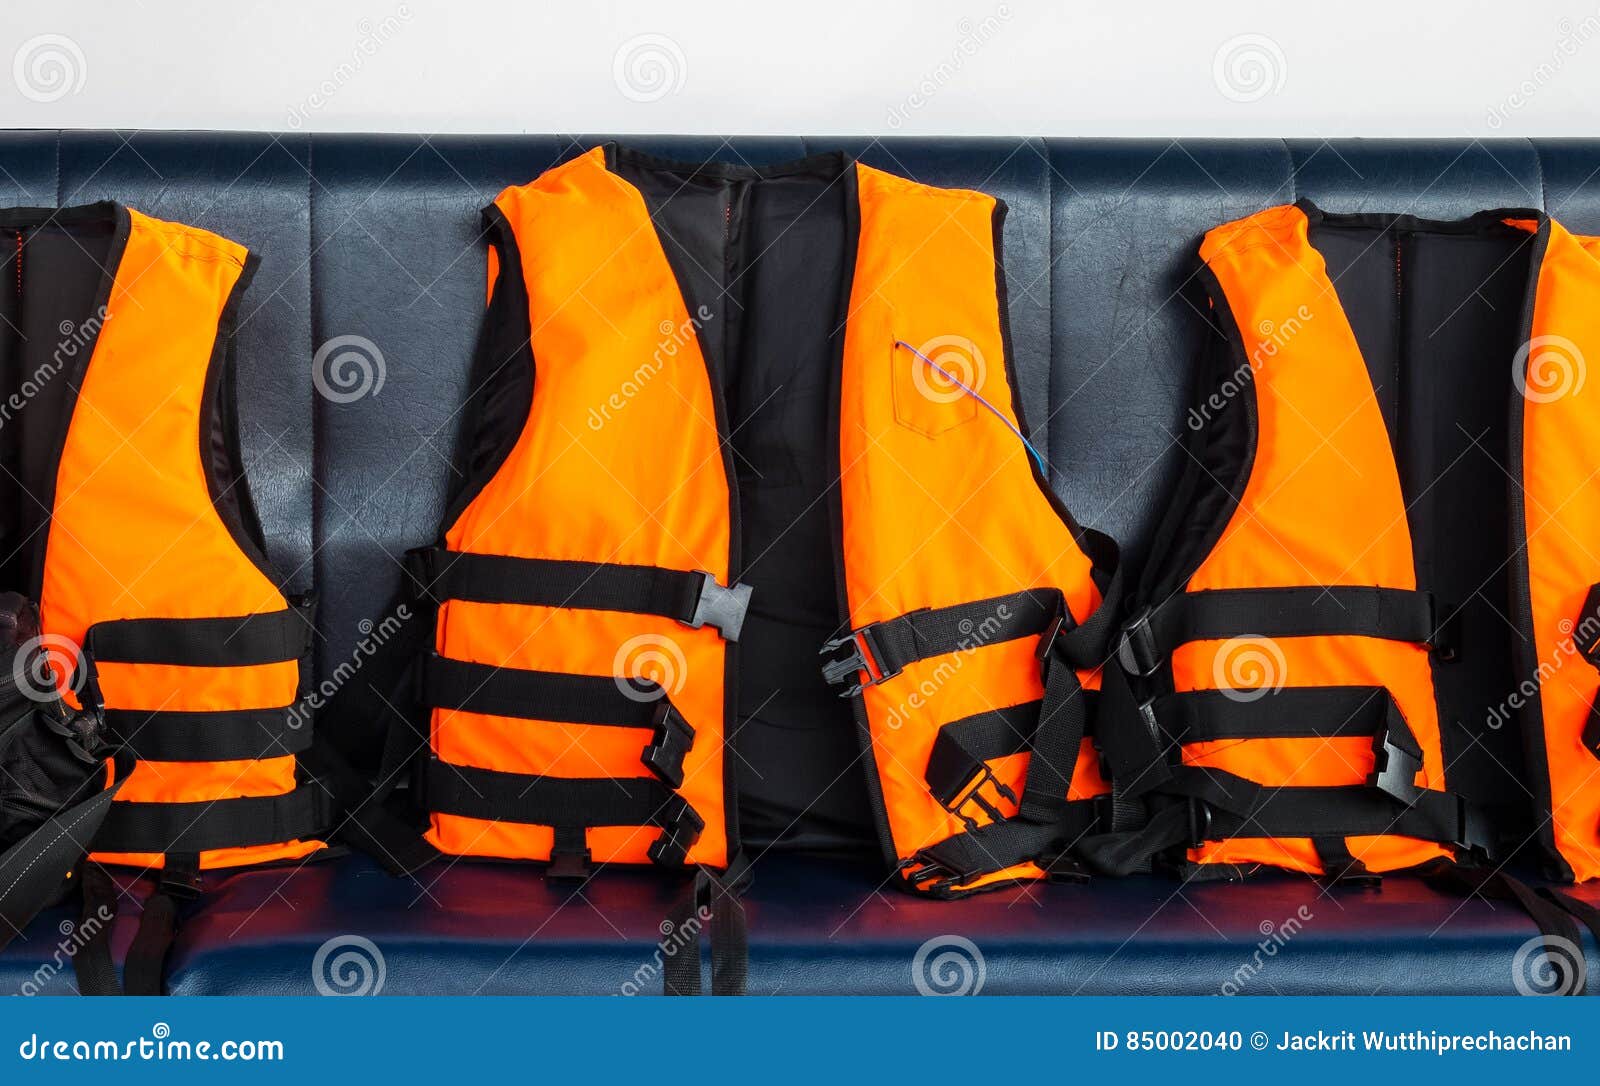 Travel To the Sea Safety. Group of Orange Life Vests on Blue Seat in ...